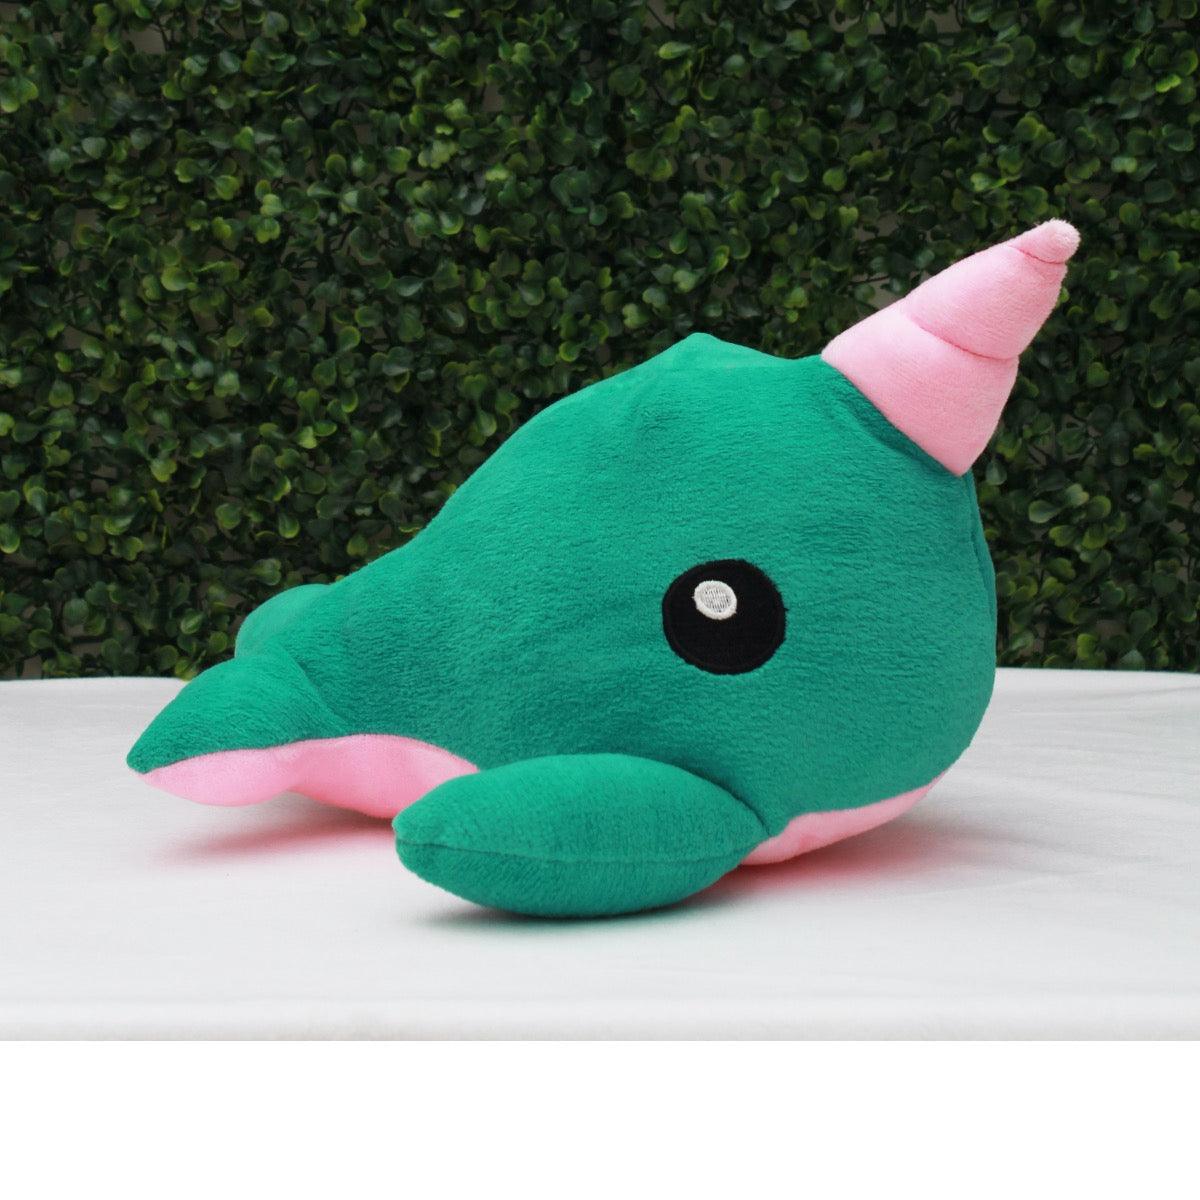 Plushkins Narwhal, Premium Green & Pink Soft Toy for Kids, Aged 1-10 years, Extra Soft Stuffed Toy with Plyfibre Stuffing